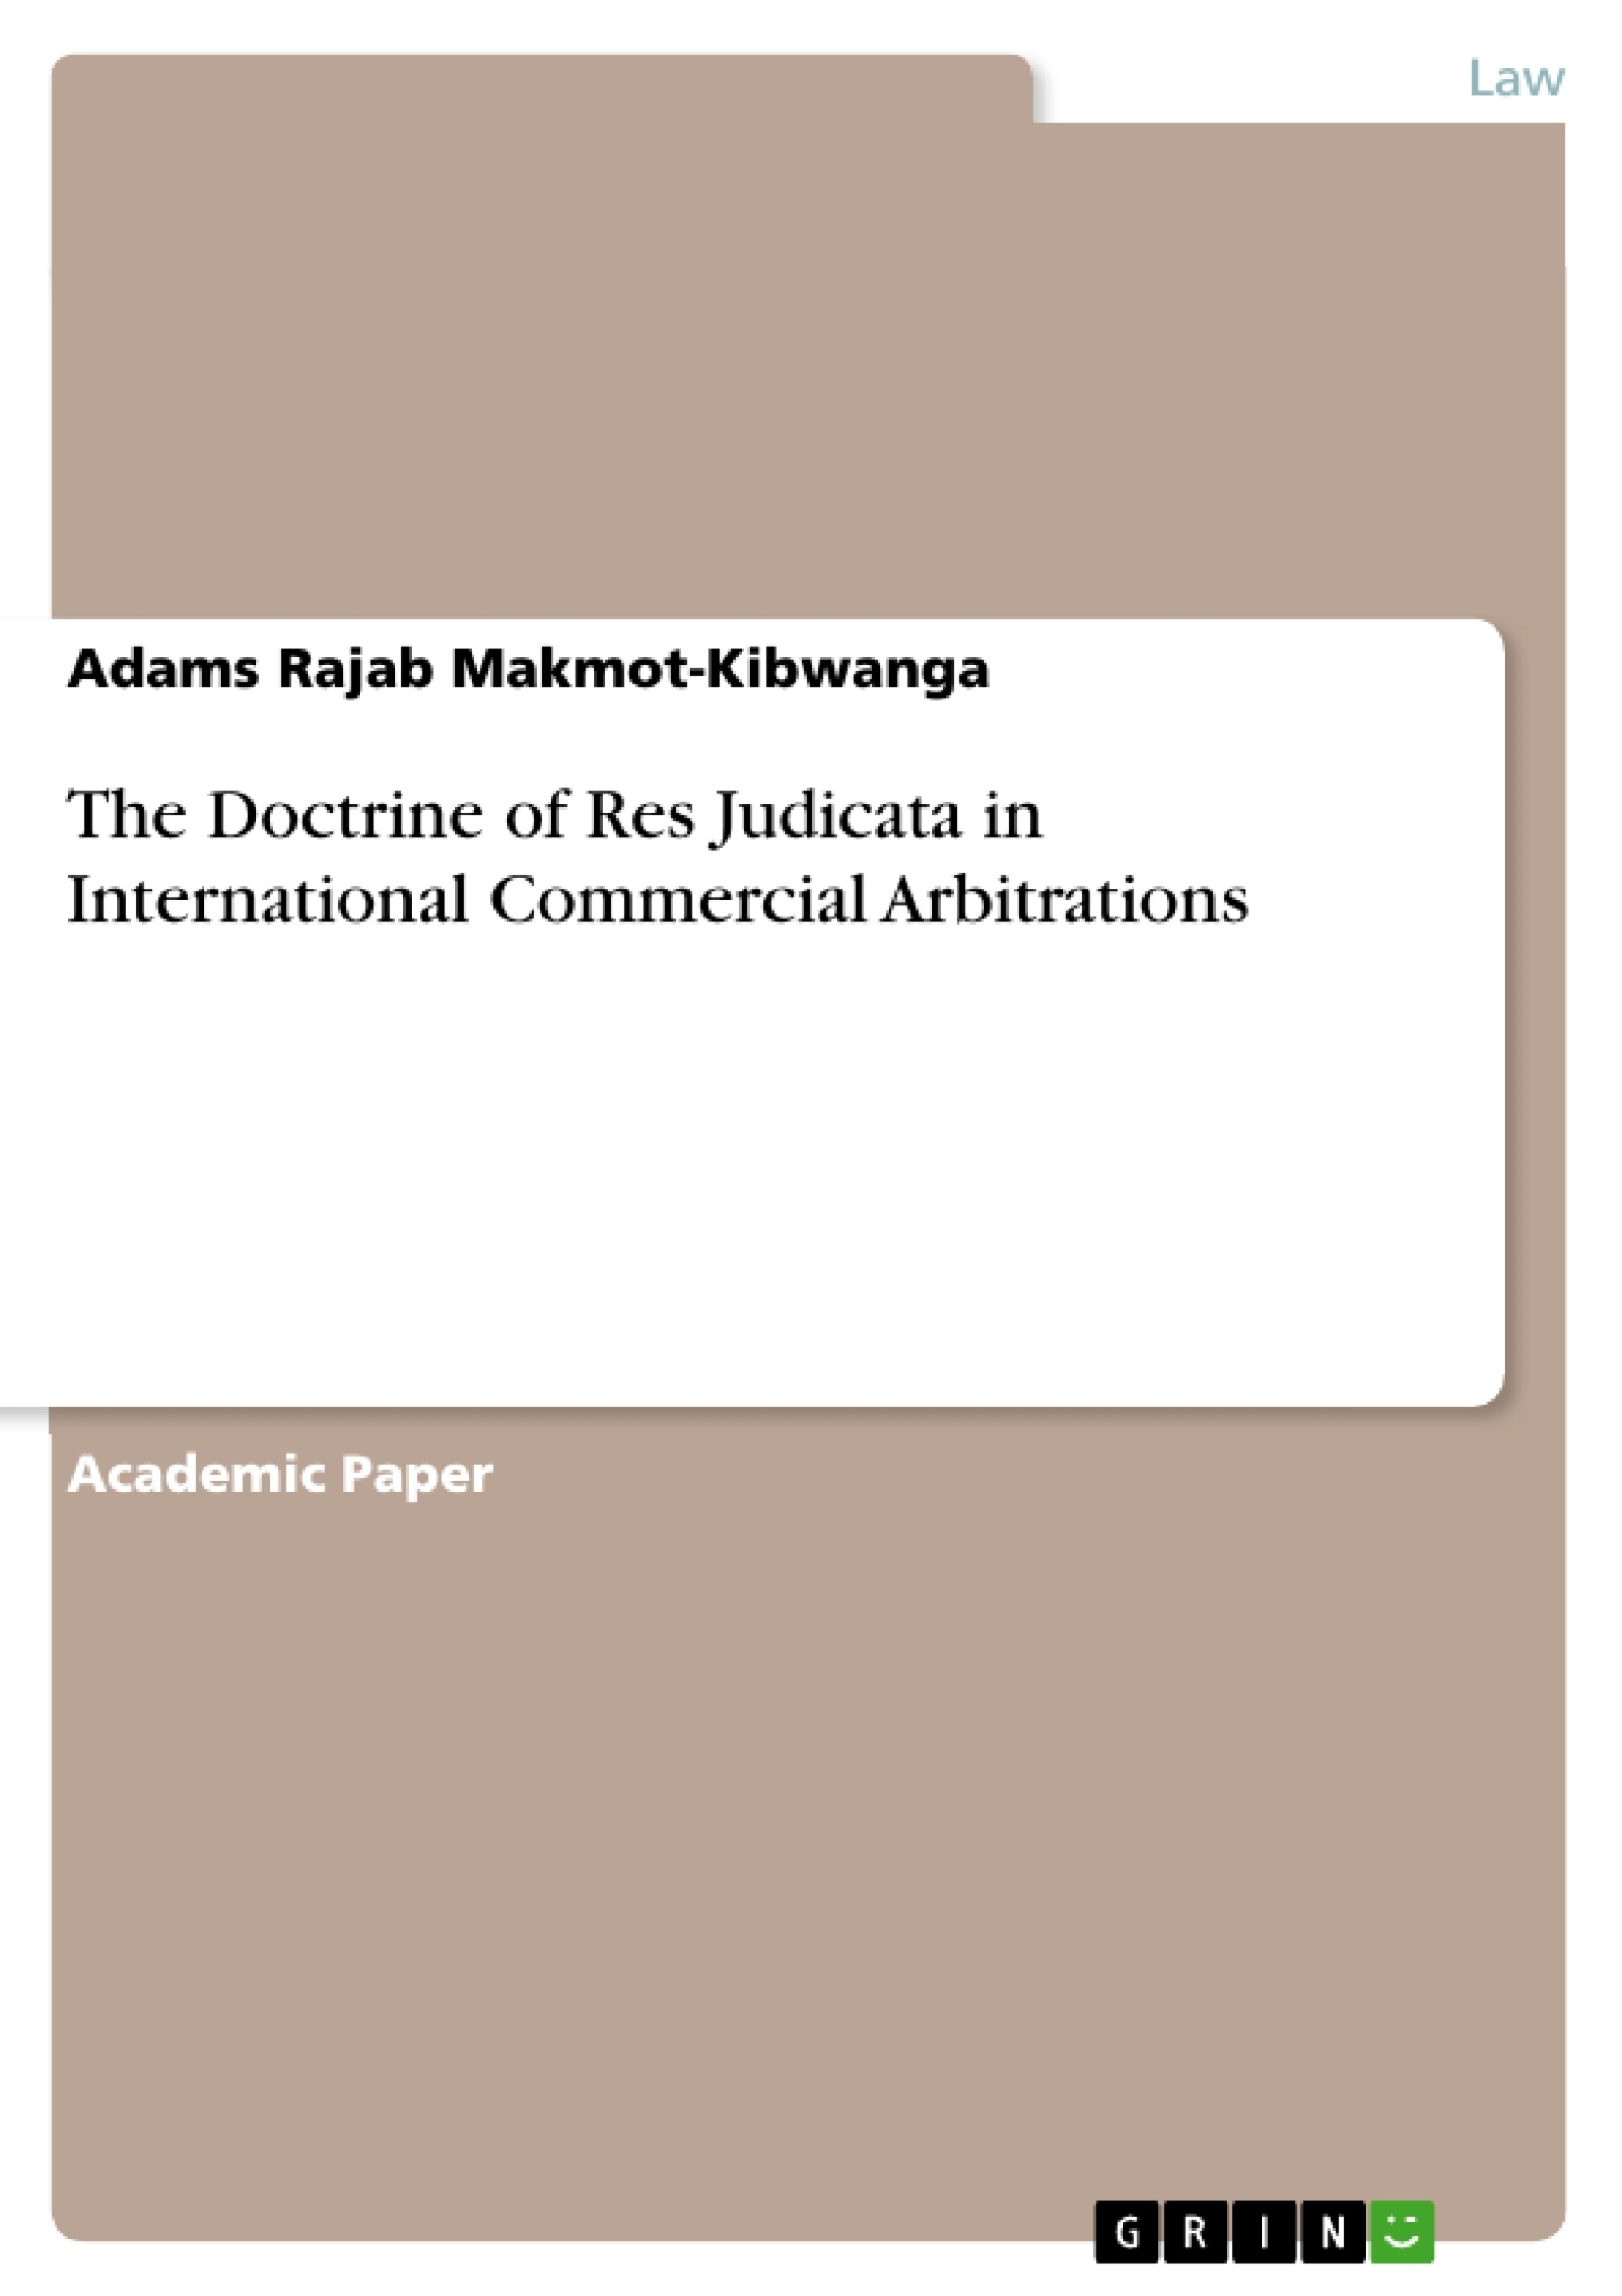 Title: The Doctrine of Res Judicata in International Commercial Arbitrations